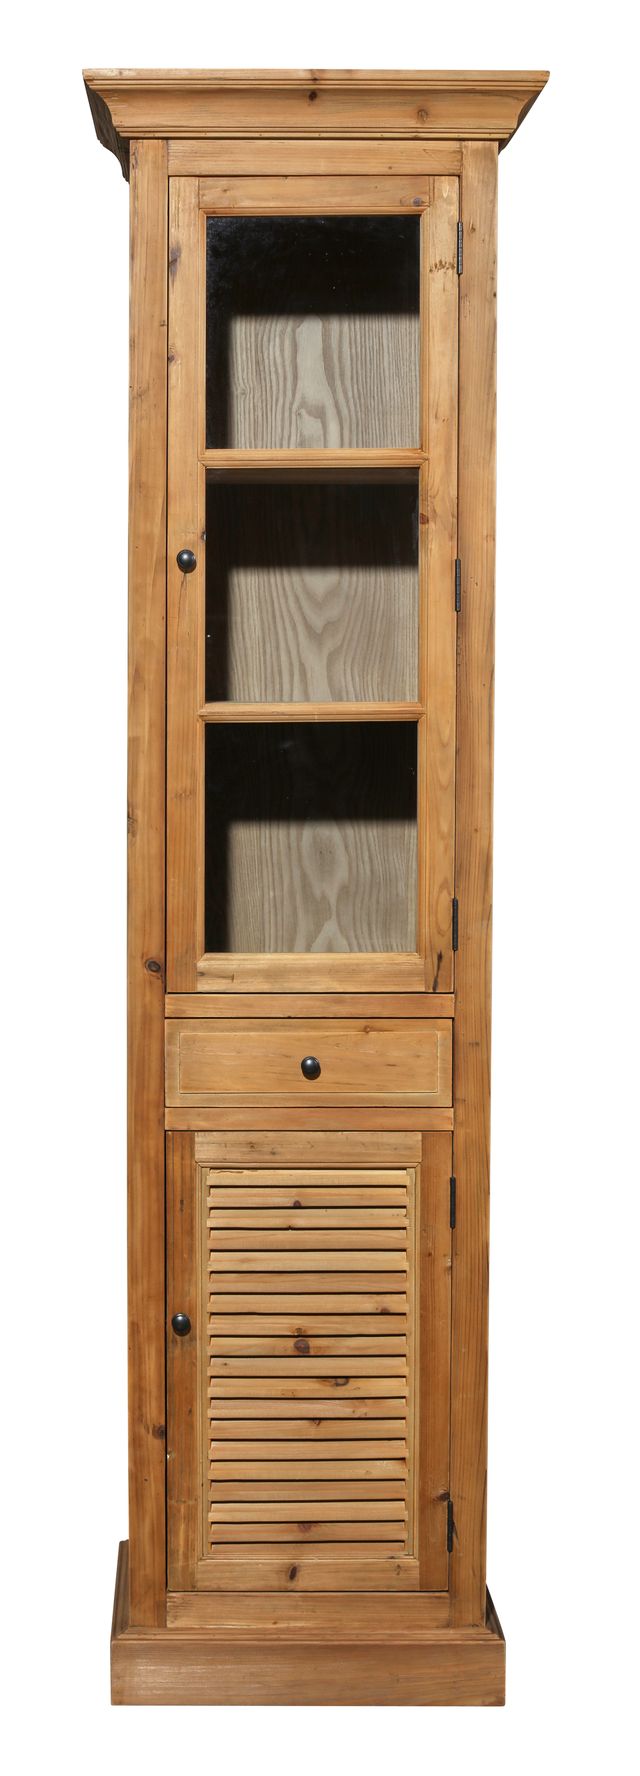 Two-Door Cabinet in Natural Pine Finish with Shutter Front Top